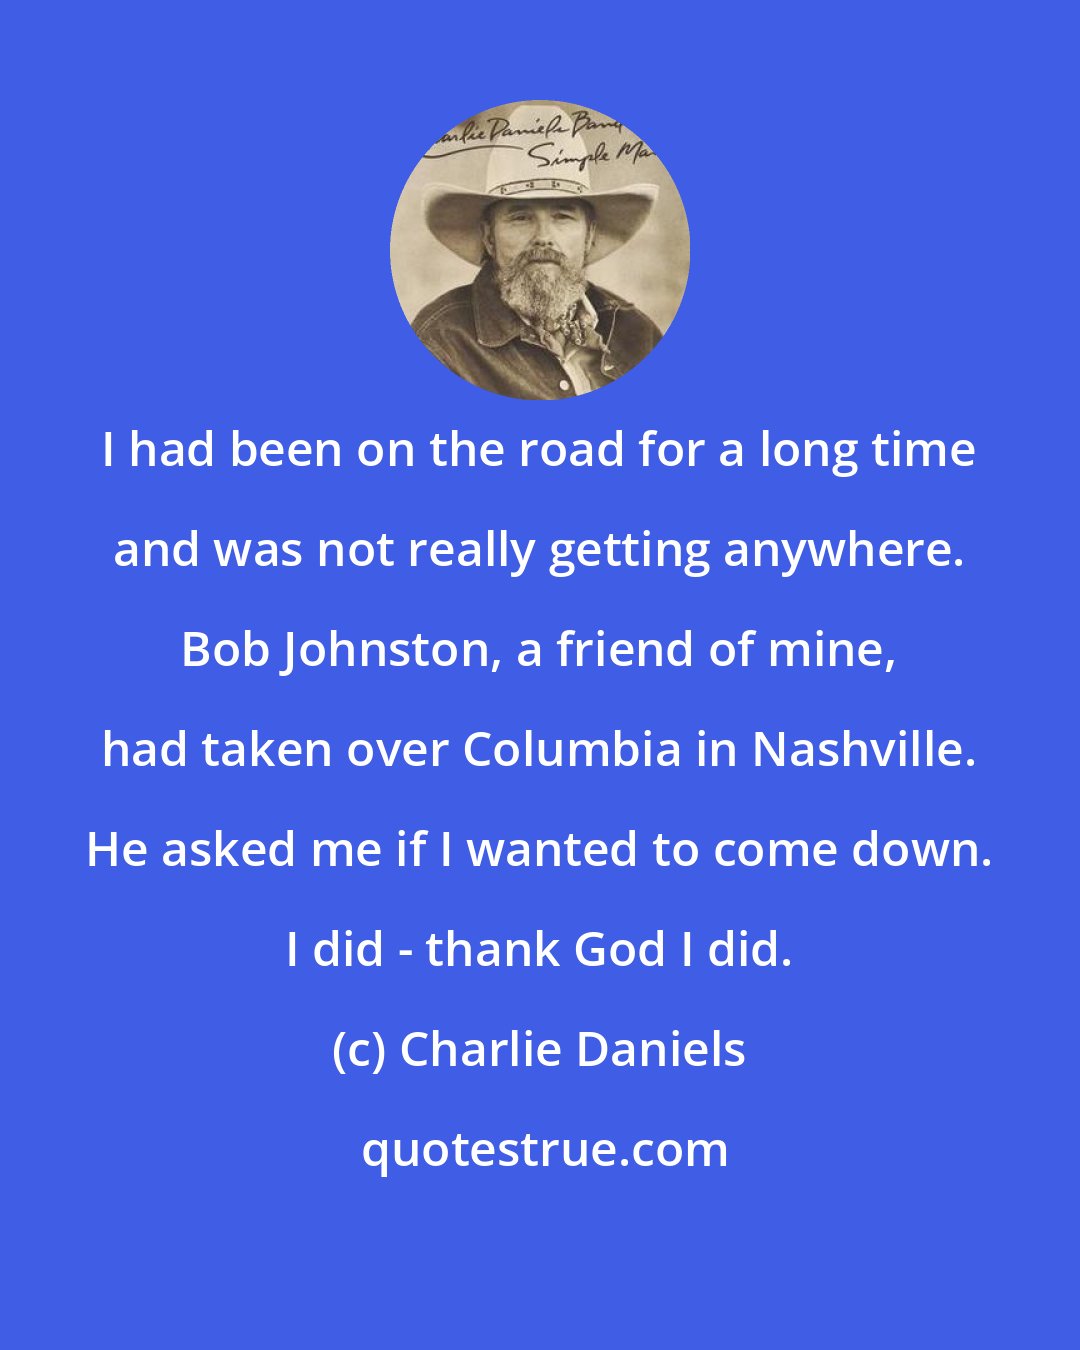 Charlie Daniels: I had been on the road for a long time and was not really getting anywhere. Bob Johnston, a friend of mine, had taken over Columbia in Nashville. He asked me if I wanted to come down. I did - thank God I did.